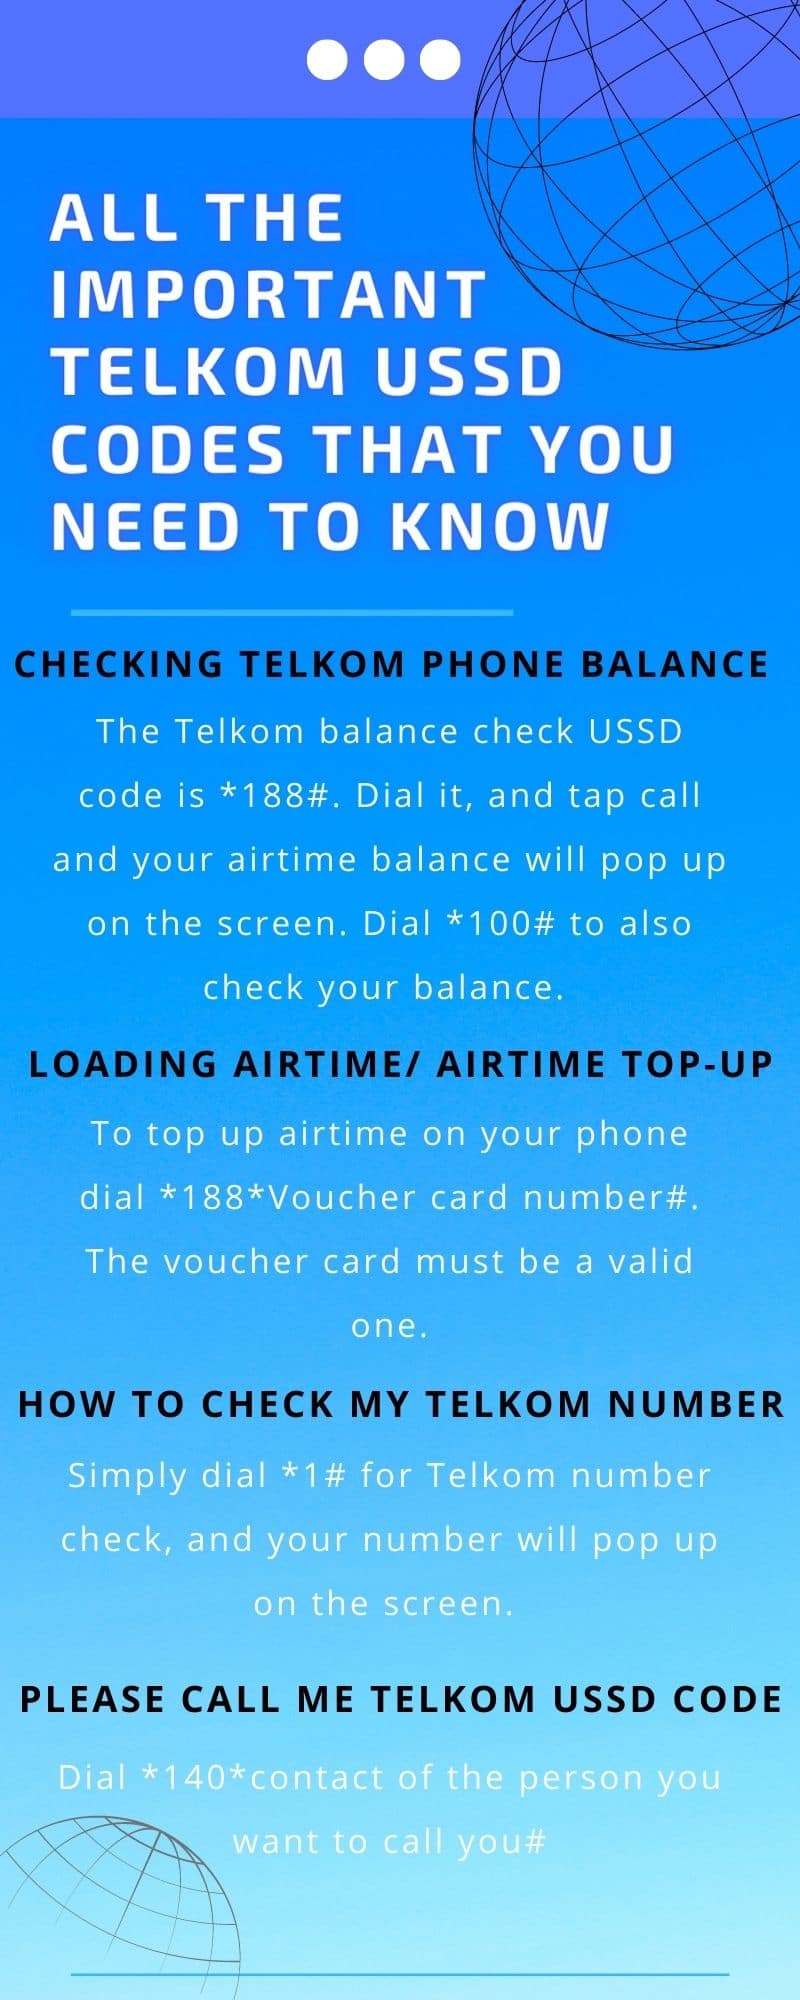 all the important telkom ussd codes that you need to know